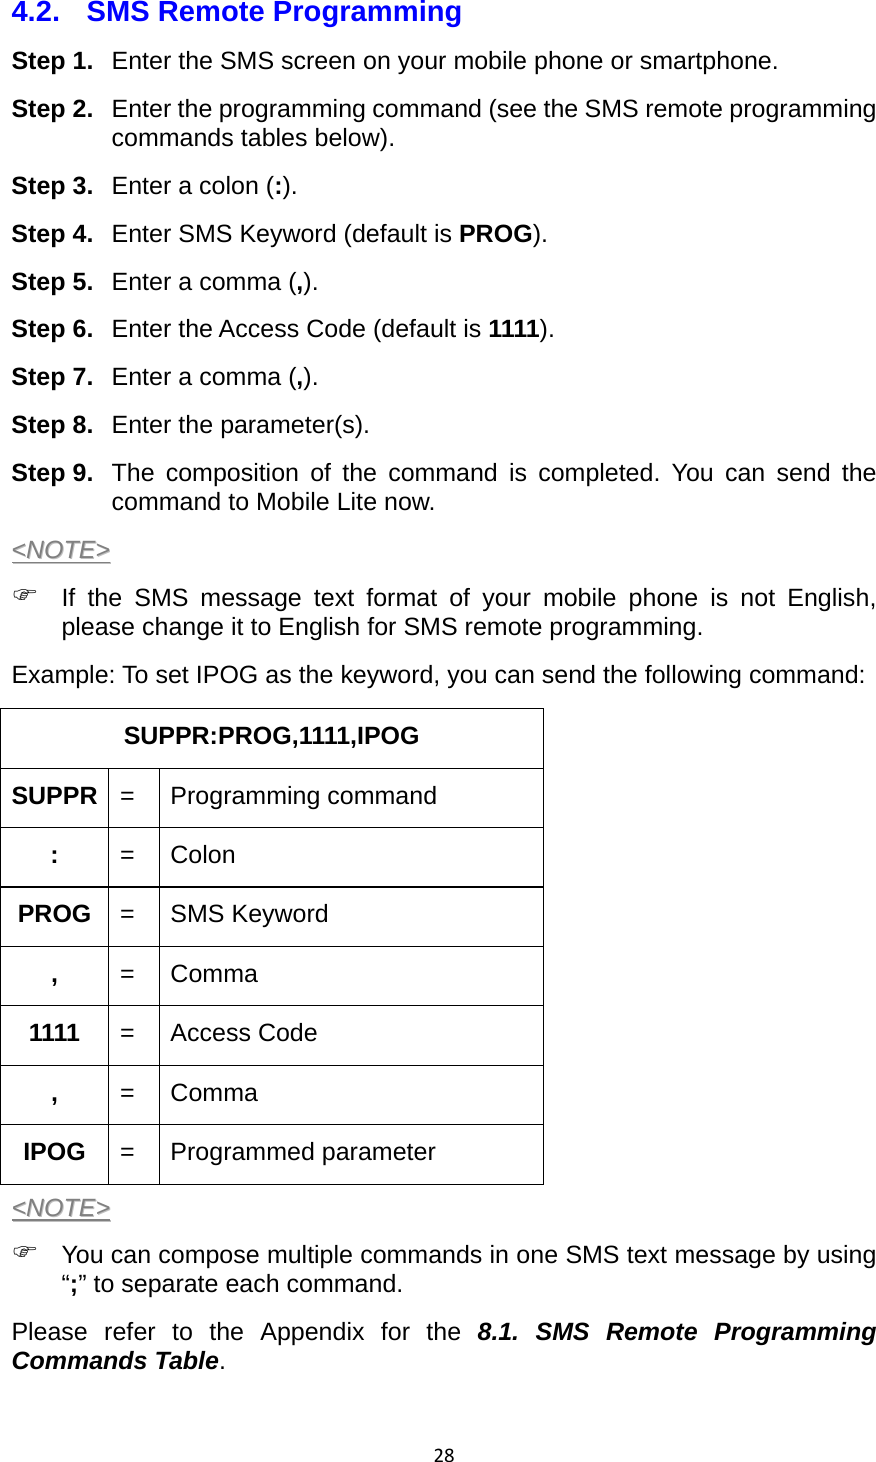 284.2.  SMS Remote Programming Step 1.  Enter the SMS screen on your mobile phone or smartphone. Step 2.  Enter the programming command (see the SMS remote programming commands tables below). Step 3.  Enter a colon (:). Step 4.  Enter SMS Keyword (default is PROG). Step 5.  Enter a comma (,). Step 6.  Enter the Access Code (default is 1111). Step 7.  Enter a comma (,). Step 8.  Enter the parameter(s).   Step 9.  The composition of the command is completed. You can send the command to Mobile Lite now.   &lt;&lt;NNOOTTEE&gt;&gt;   If the SMS message text format of your mobile phone is not English, please change it to English for SMS remote programming.   Example: To set IPOG as the keyword, you can send the following command: SUPPR:PROG,1111,IPOG         SUPPR  =   Programming command :  = Colon PROG  = SMS Keyword ,  = Comma 1111  = Access Code ,  = Comma IPOG  = Programmed parameter &lt;&lt;NNOOTTEE&gt;&gt;   You can compose multiple commands in one SMS text message by using “;” to separate each command.   Please refer to the Appendix for the 8.1. SMS Remote Programming Commands Table.  